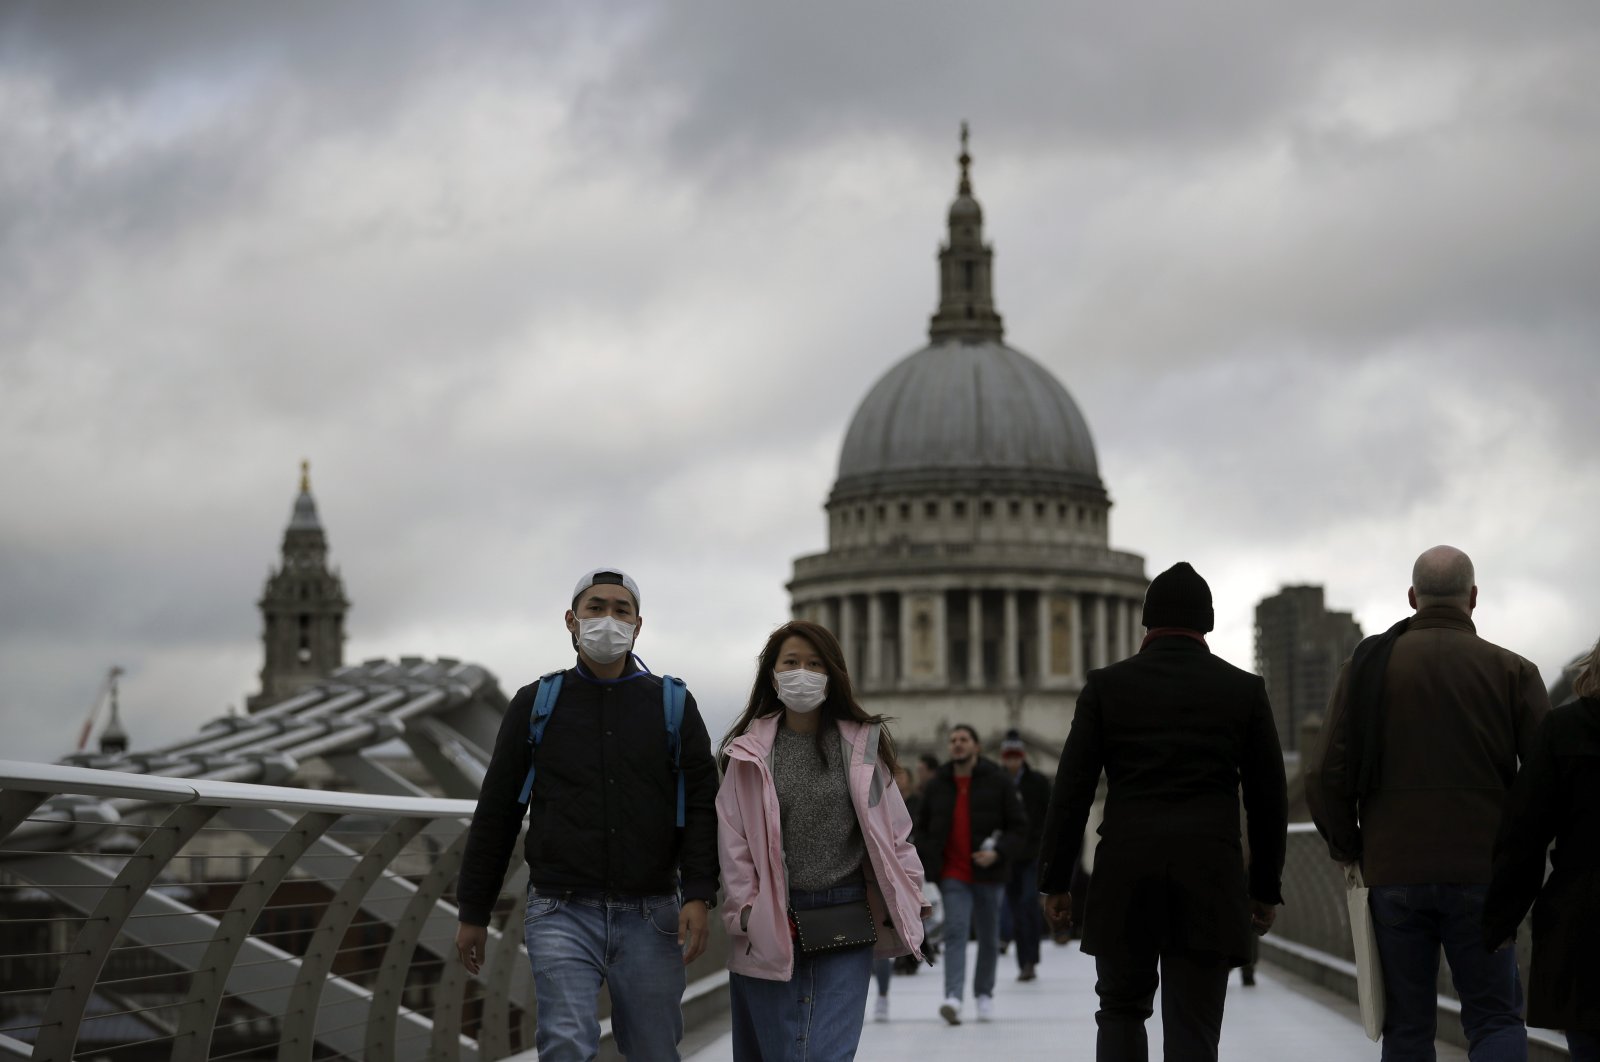 People wearing face masks walk across the Millennium footbridge backdropped by the dome of St. Paul's Cathedral in London, Tuesday, March 10, 2020. (AP Photo)